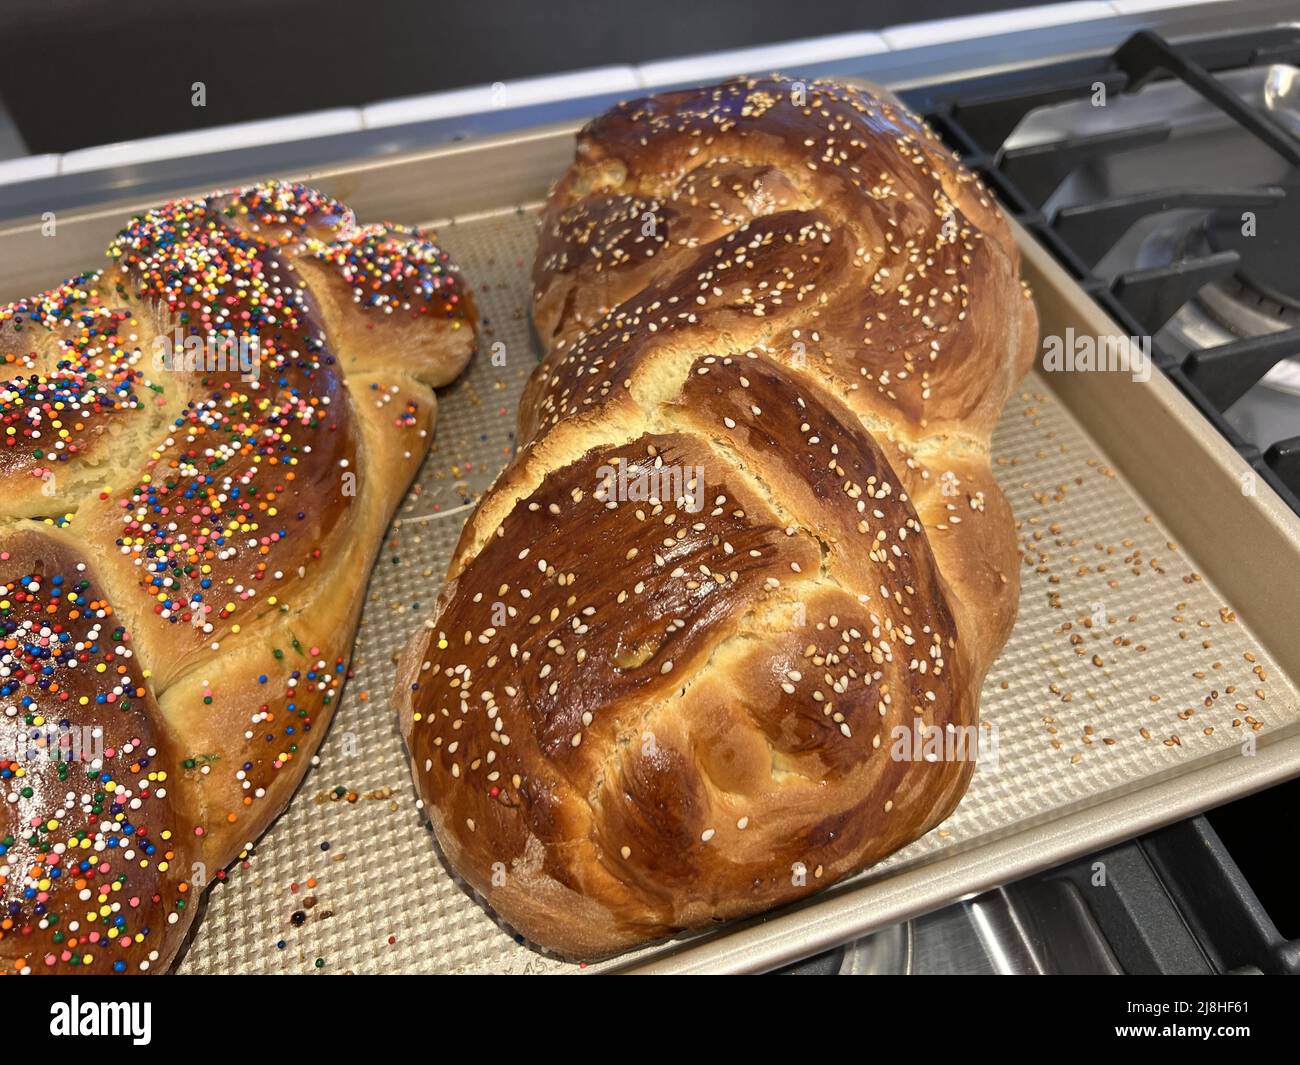 Homemade sesame and sprinkle Challah bread, baked for the Jewish holiday of Shabbat, is visible on a baking sheet in a domestic kitchen, Lafayette, California, March 4, 2022. Photo courtesy Sftm. Stock Photo